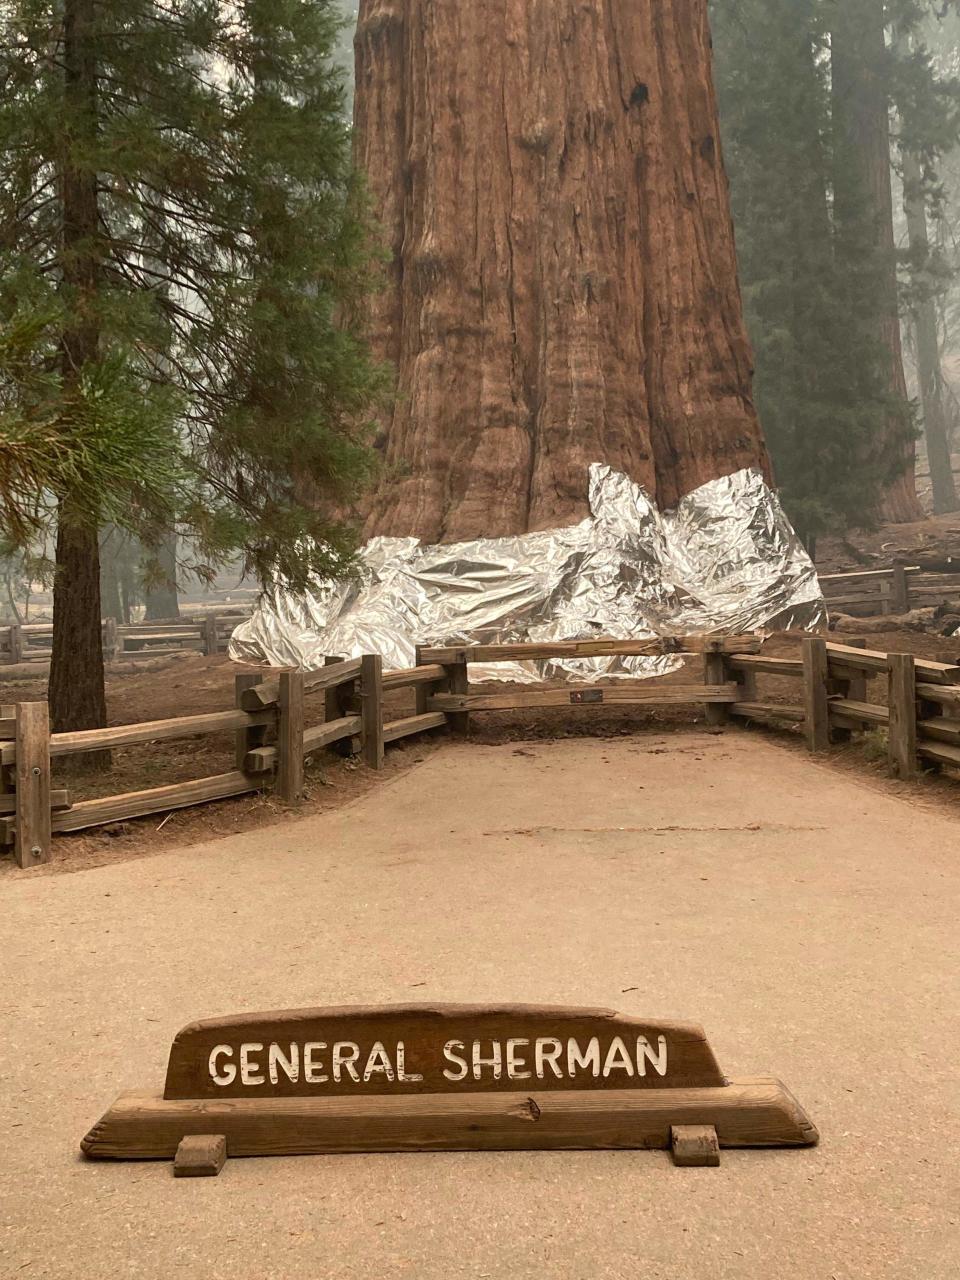 In this picture released by the National Park Service on September 16, 2021, firefighters wrap the historic General Sherman Tree, estimated to be around 2,300 to 2,700 years old, with fire-proof blankets in Sequoia National Park, California. - The world's biggest trees were being wrapped in fire-proof blankets Thursday in an effort to protect them from huge blazes tearing through the drought-stricken western United States.